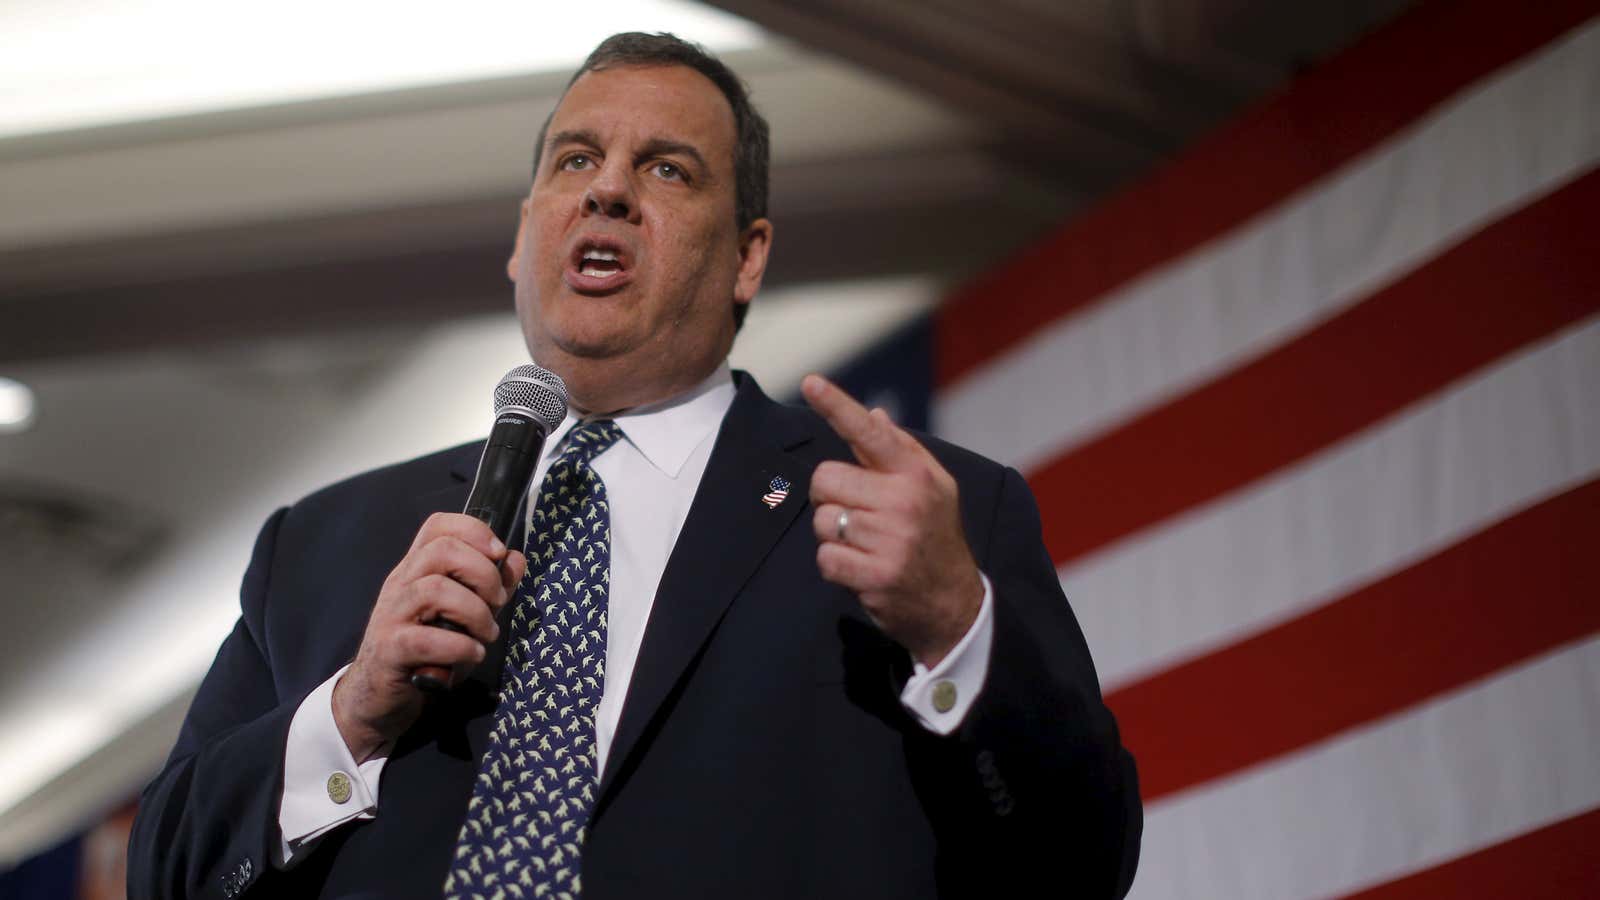 Chris Christie plans to crack down on marijuana if elected president.